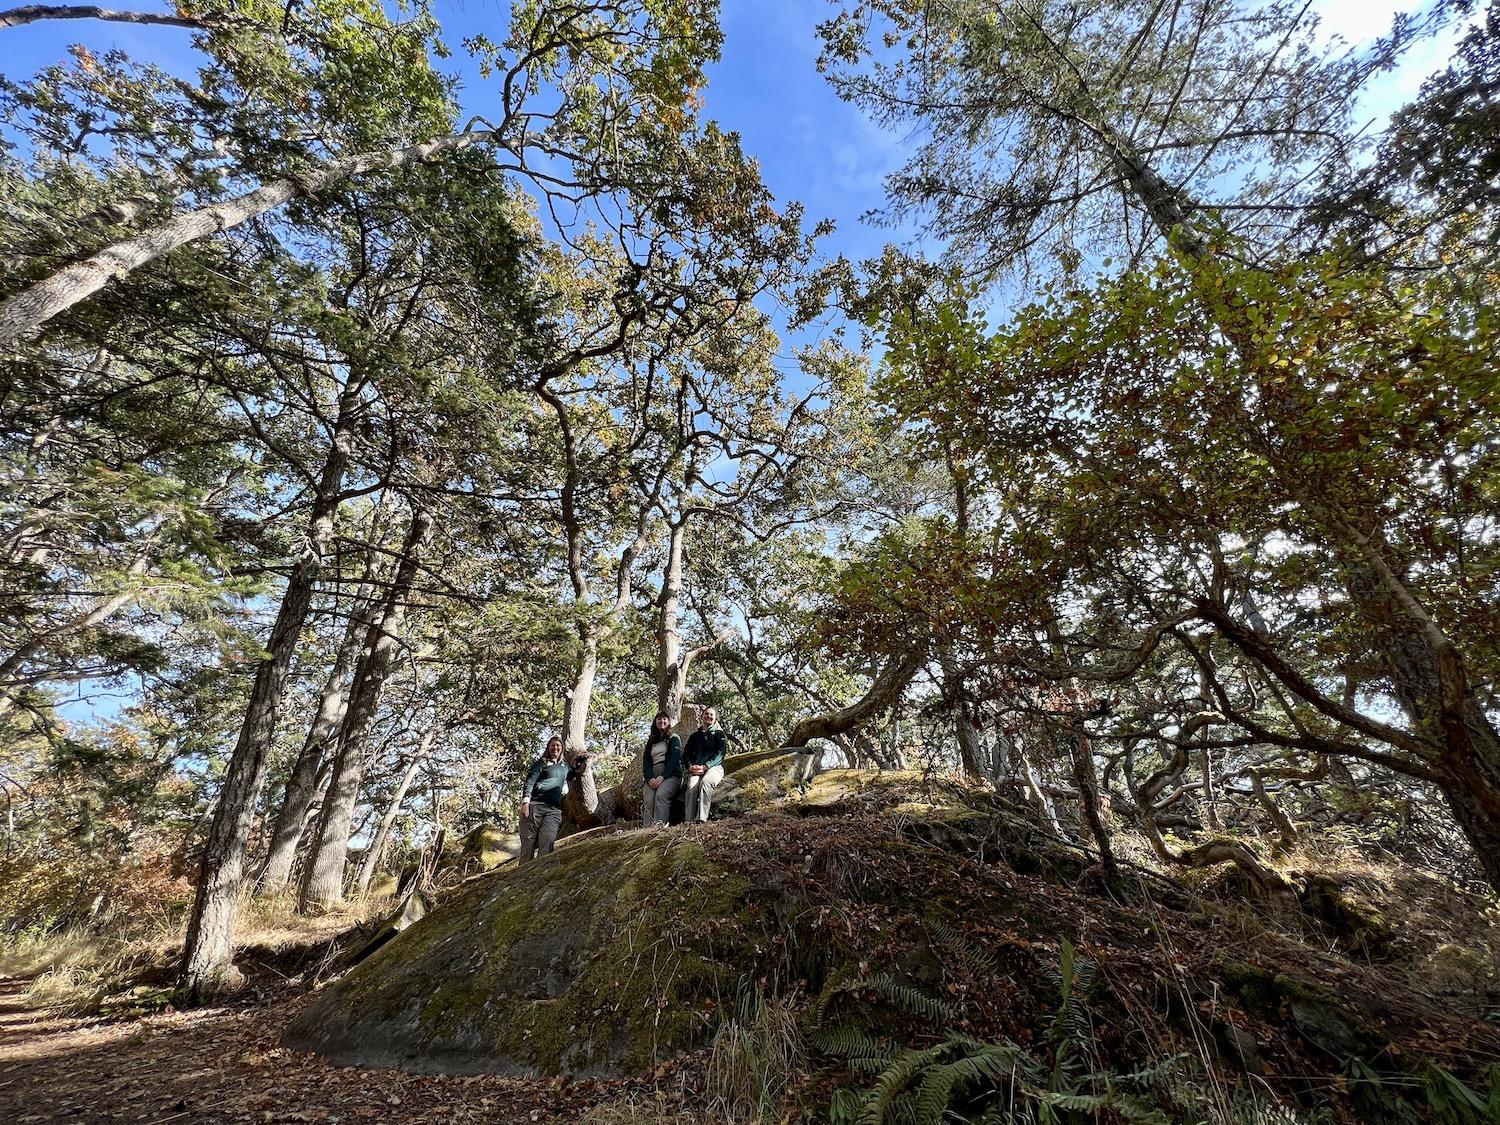 Parks Canada's Aimée Pelletier, Anna Lee and Ashley Everitt pose by the Gnarly Oak on the Historic Nature Trail at Fort Rodd Hill and Fisgard Lighthouse National Historic Sites.